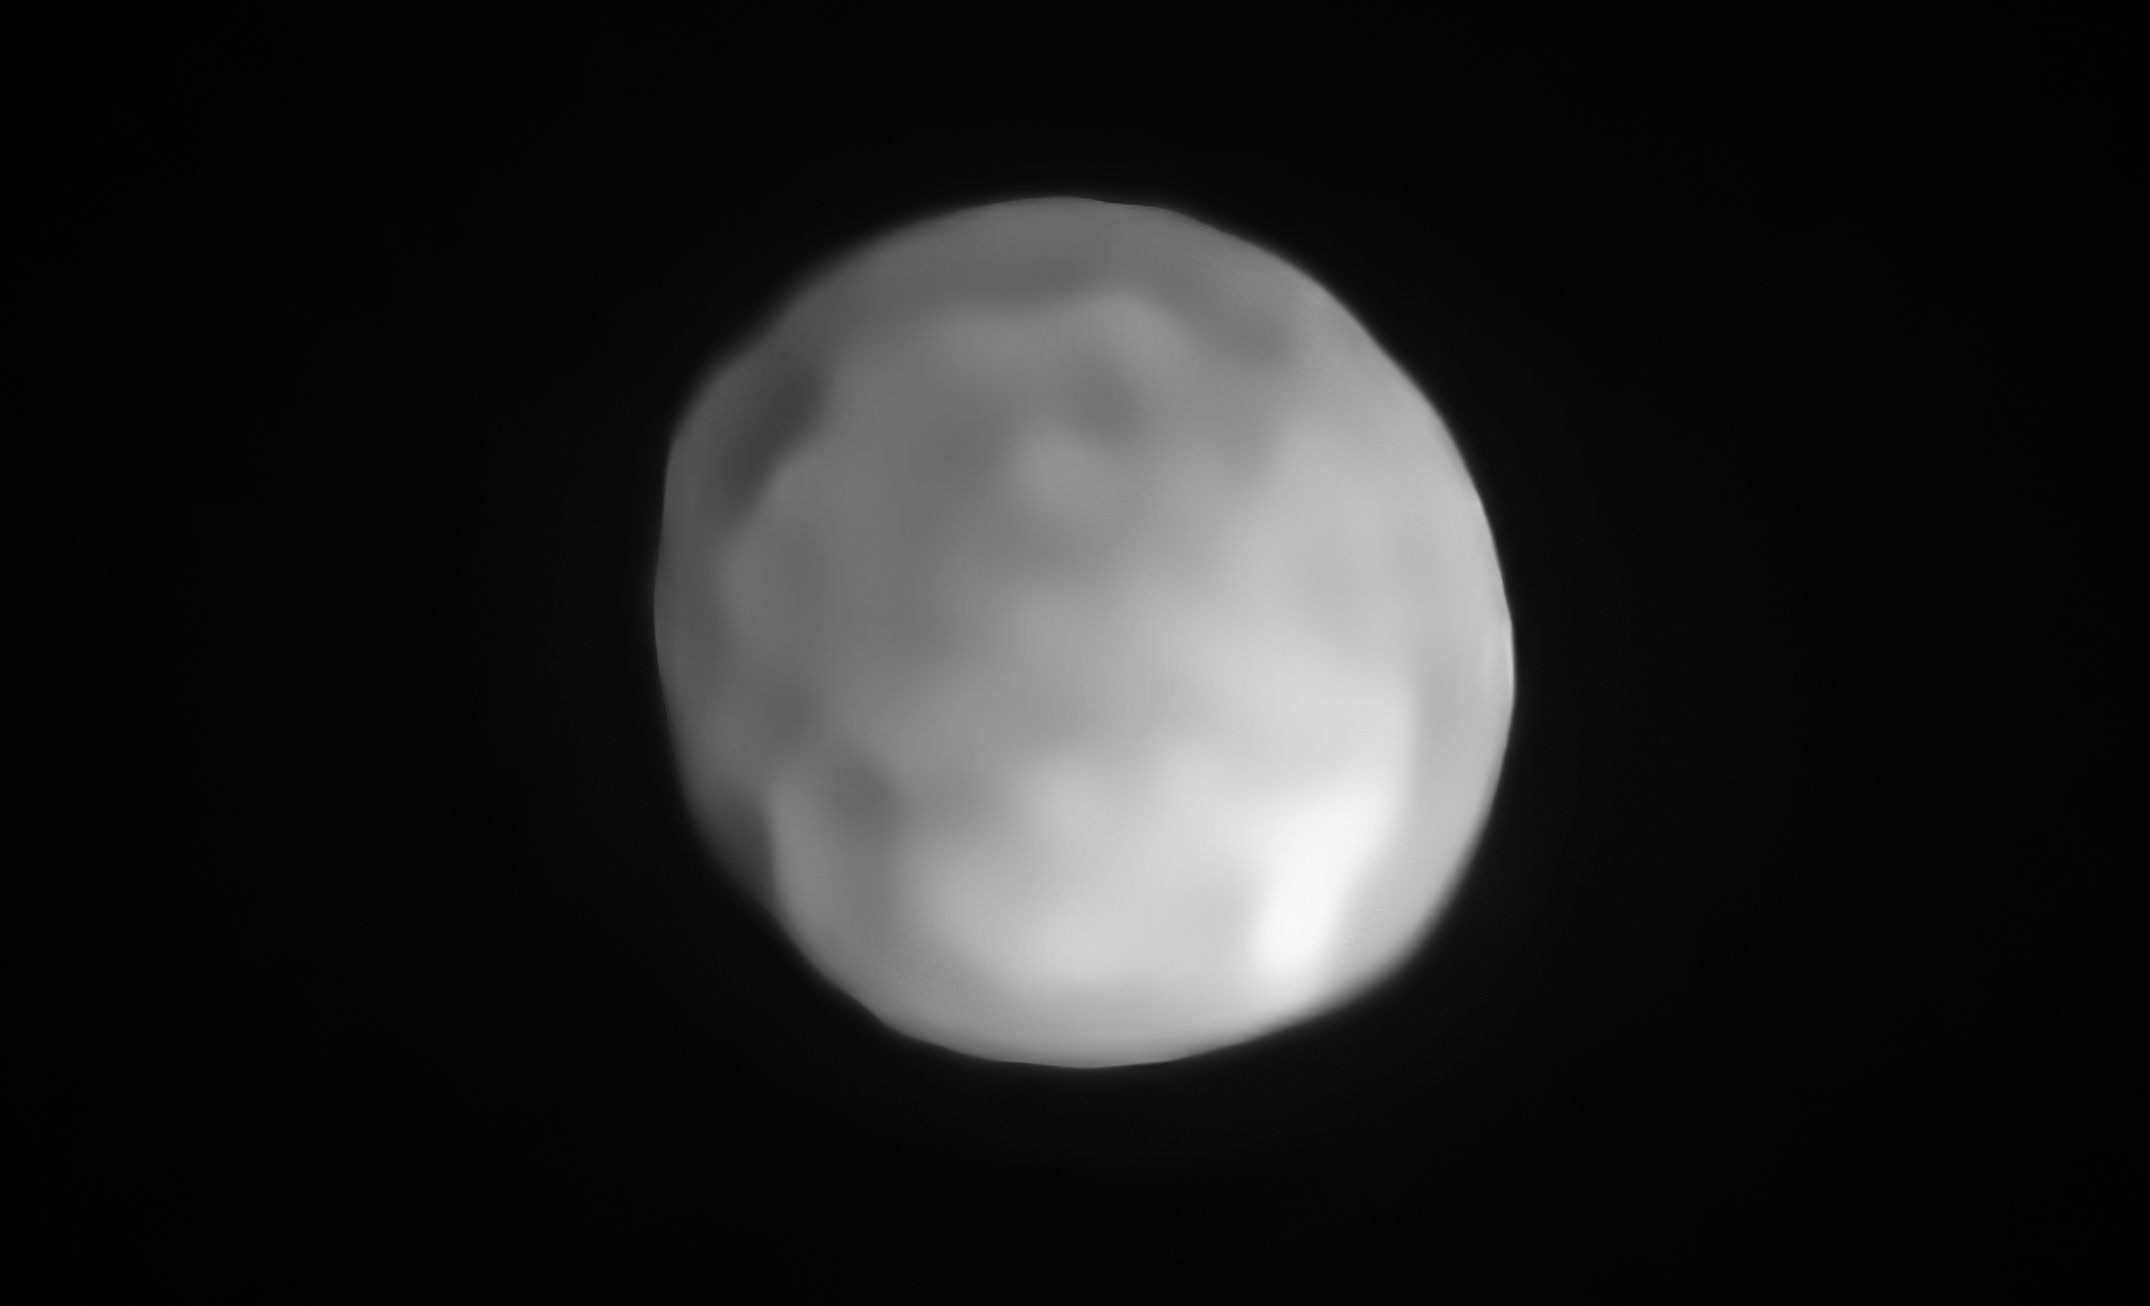 An actual image of the protoplanet Hygiea, taken using the SPHERE camera on the Very Large Telescope. Credit: ESO/P. Vernazza et al./MISTRAL algorithm (ONERA/CNRS)